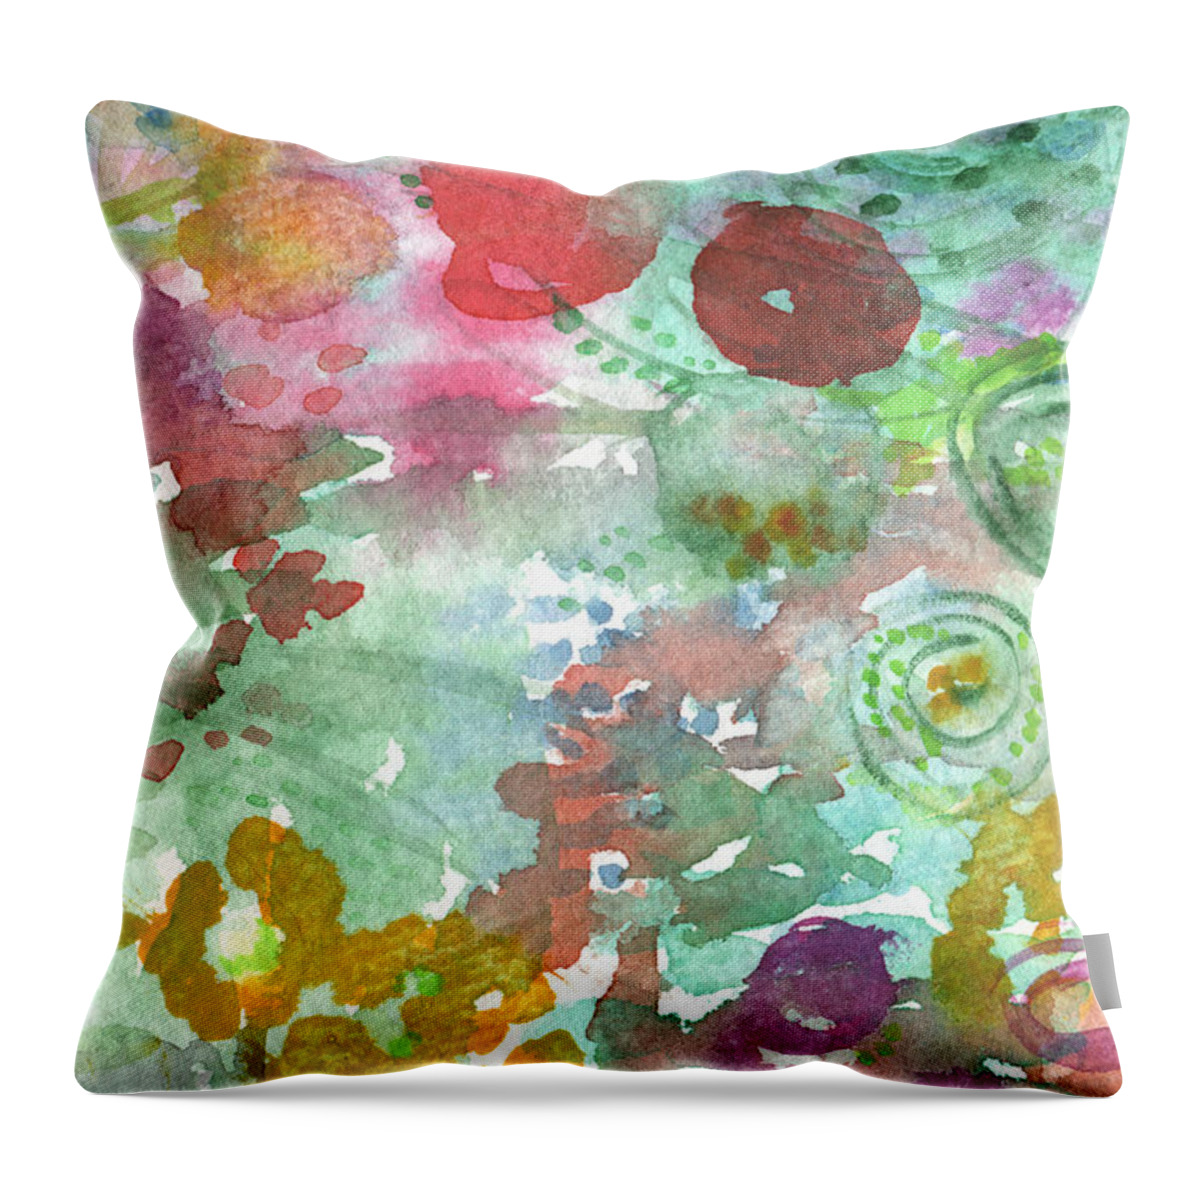 Flowers Throw Pillow featuring the painting Abstract Garden by Linda Woods